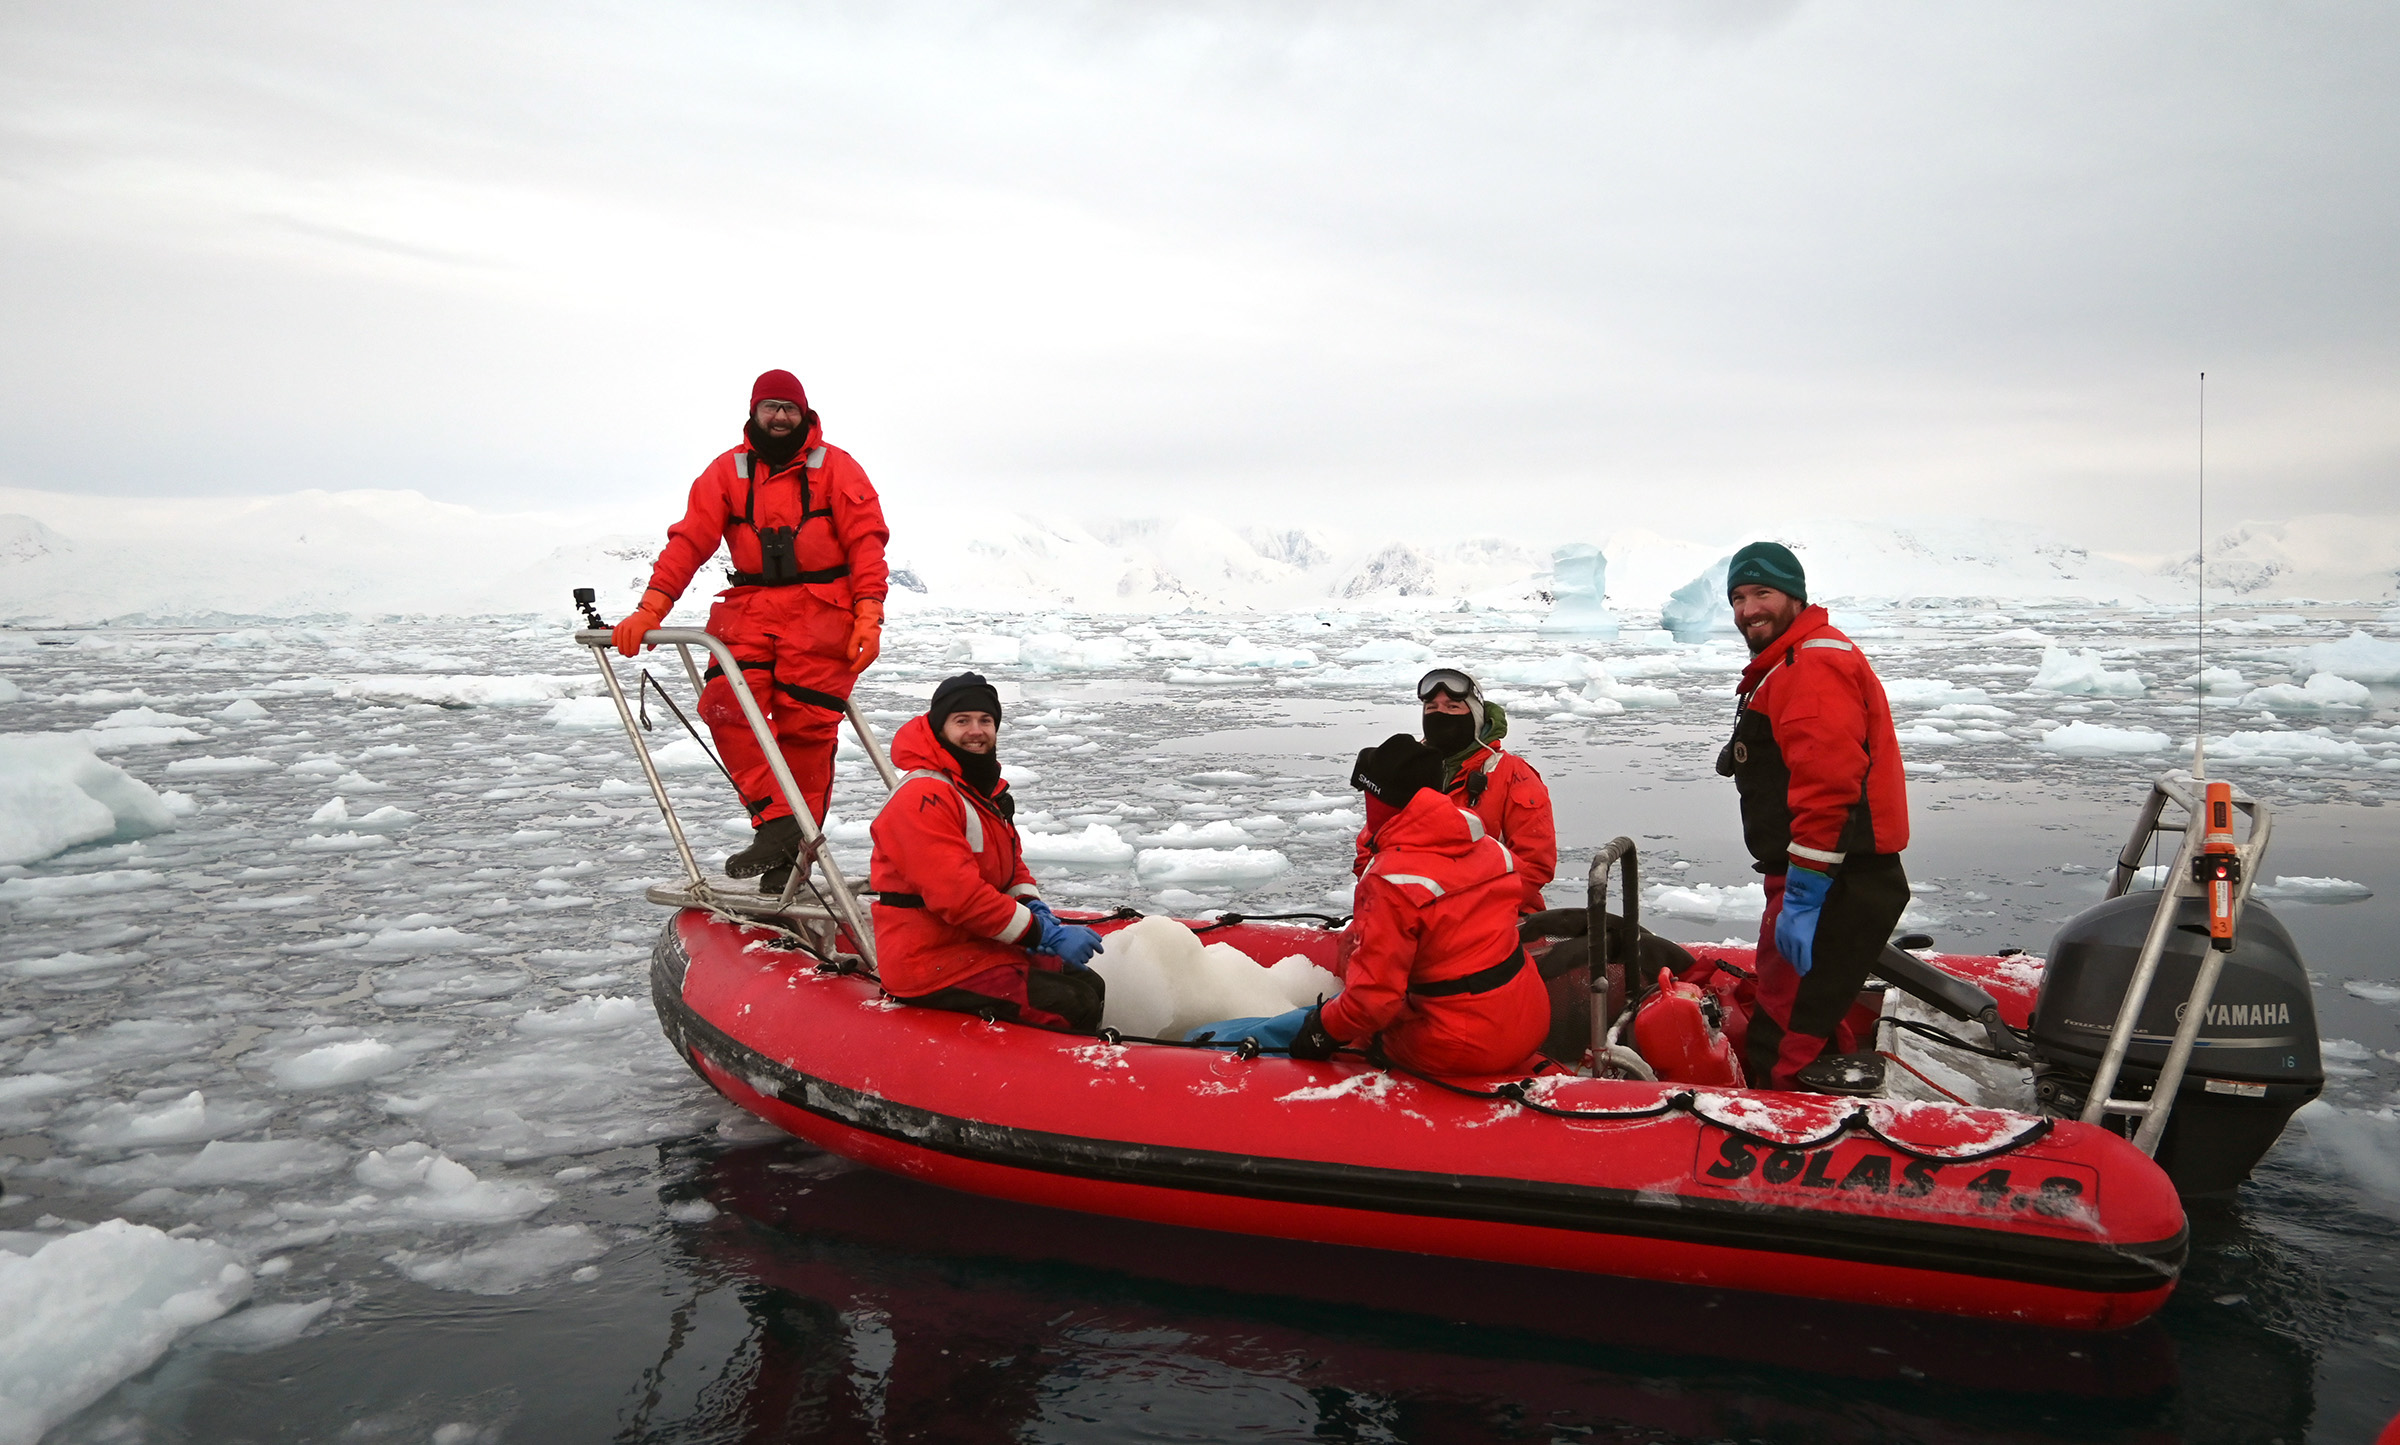 Five people in a small rubber boat in icy water.